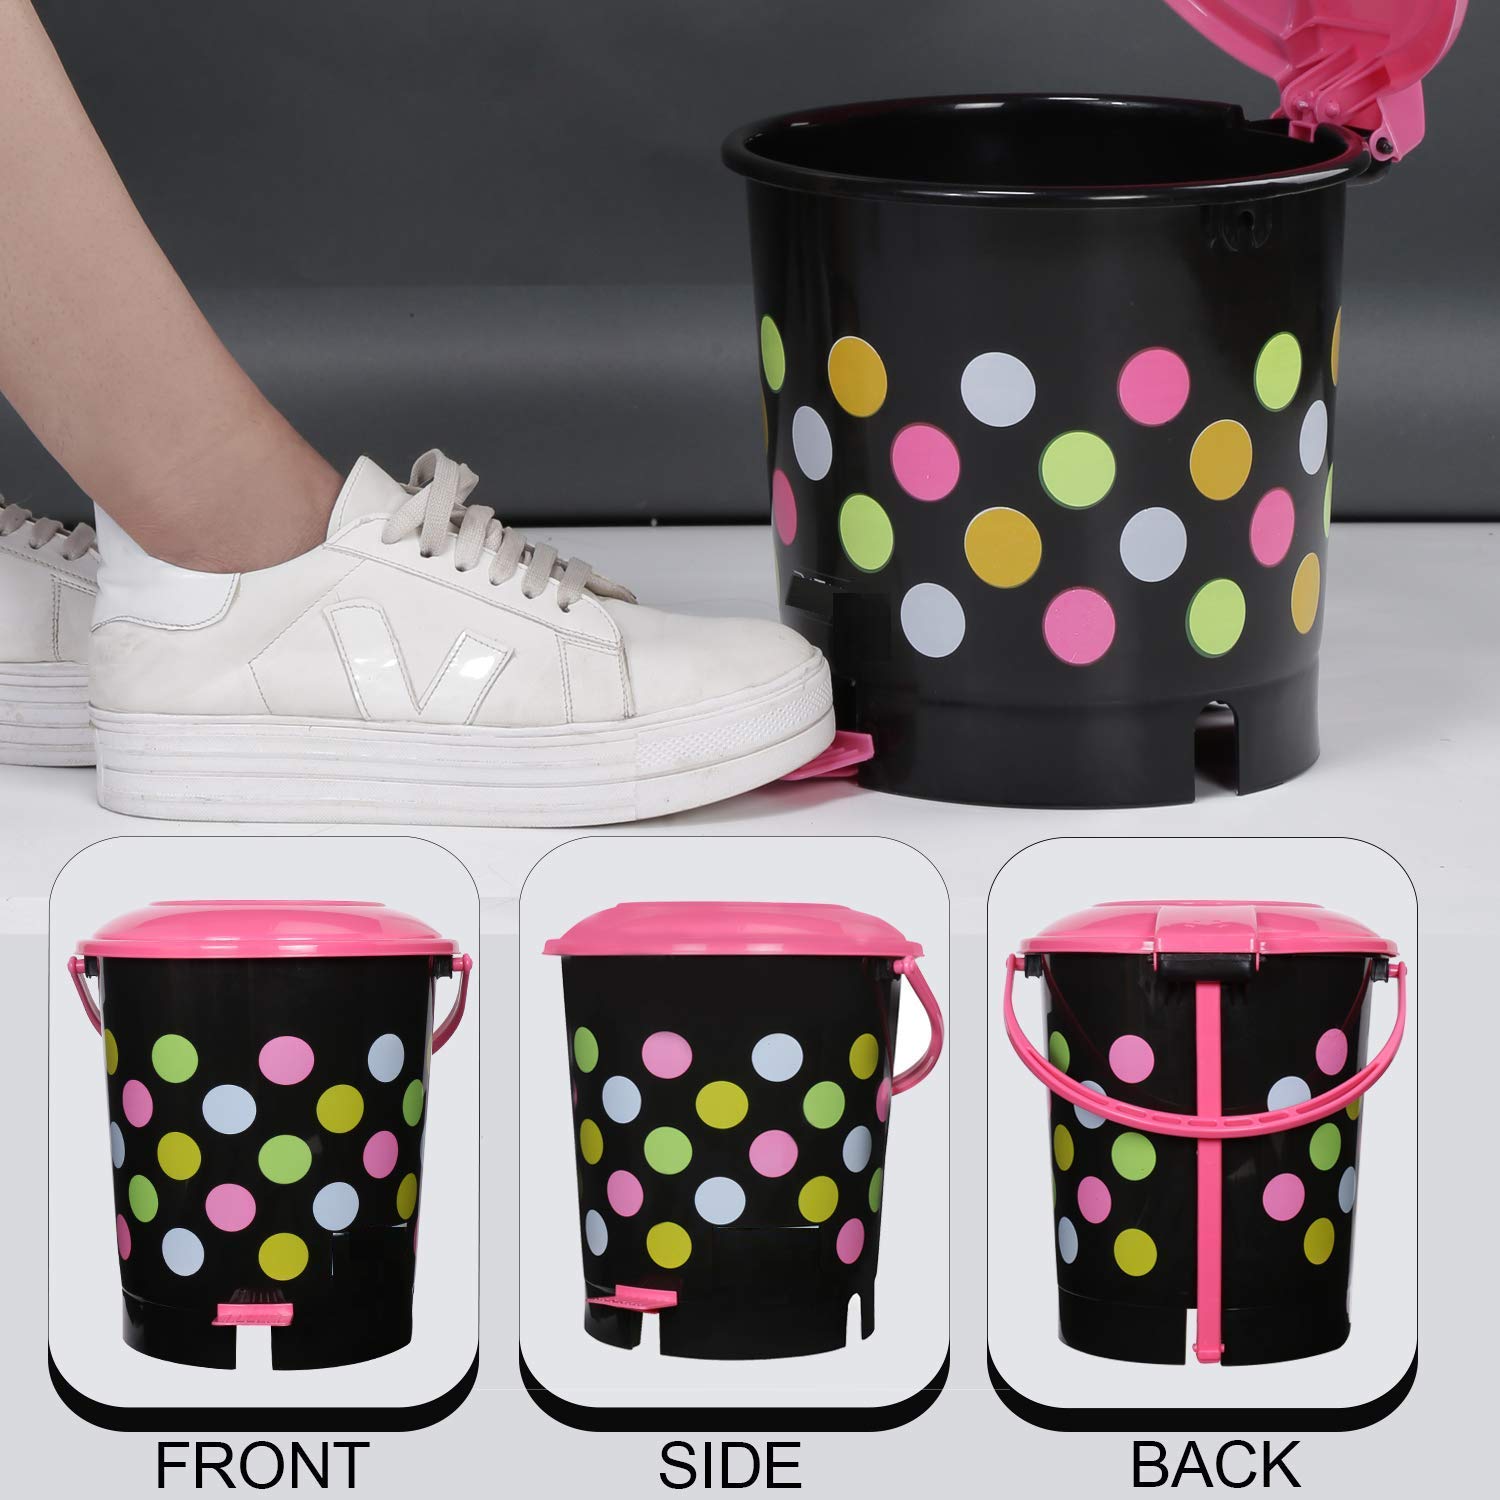 9015 Printed Pedal Bin used for storing garbage and waste products and it would use in all kinds of places like household and official etc. DeoDap